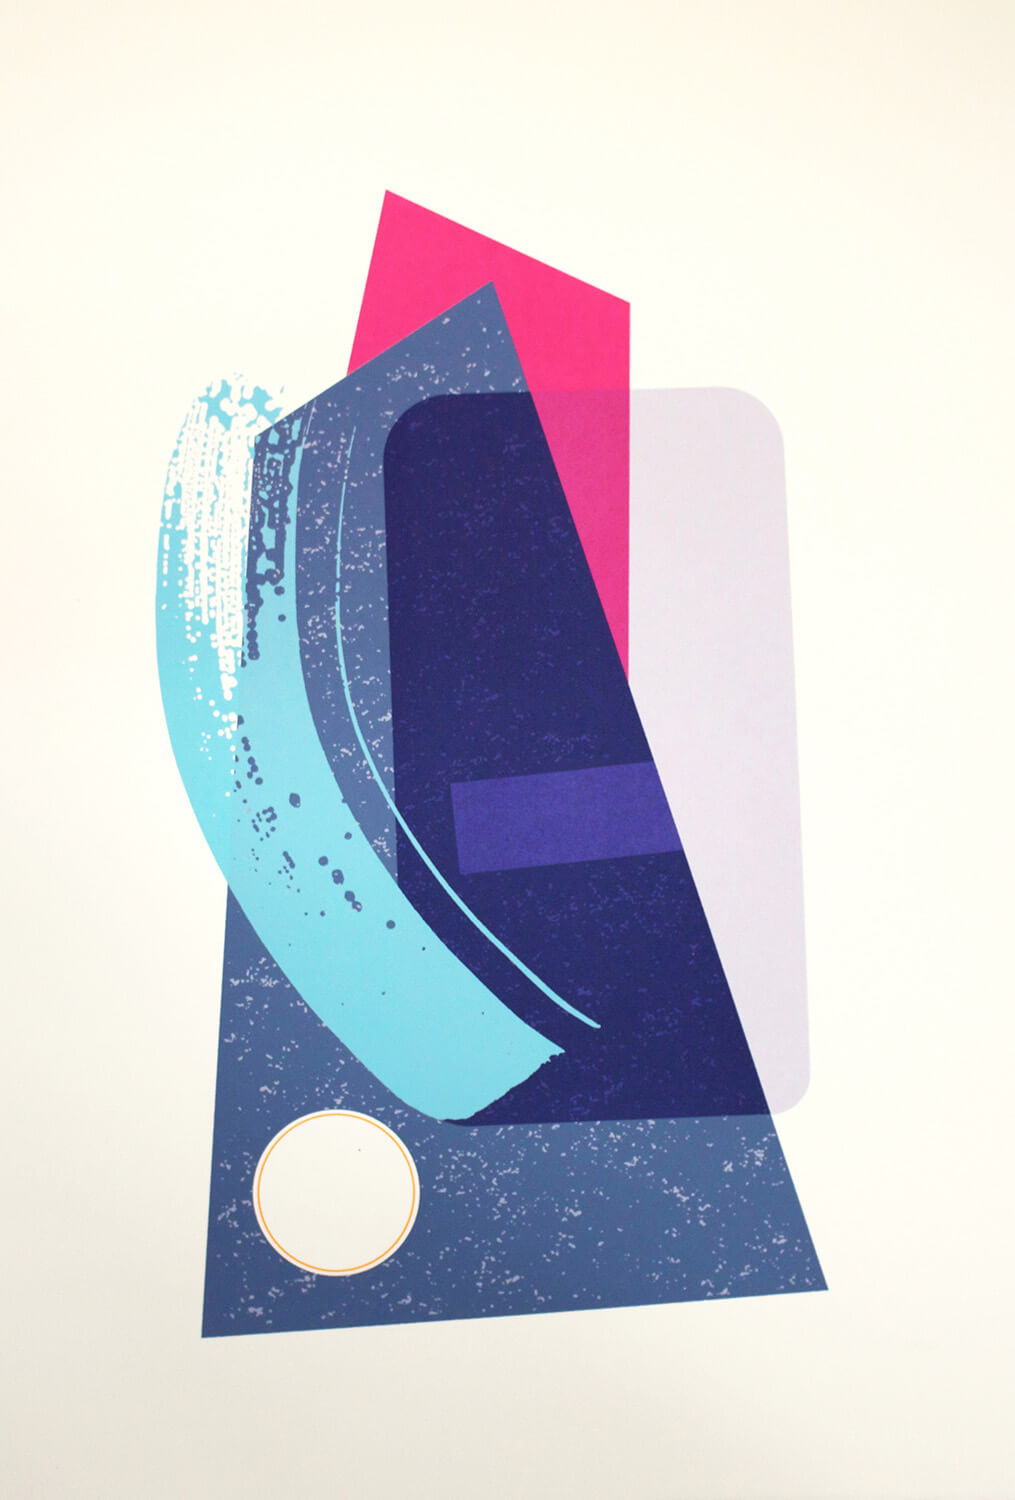 Abstract pop art screenprint in blue & pink, with blue brushstroke effect, in a limited edition by Josie Blue Molloy